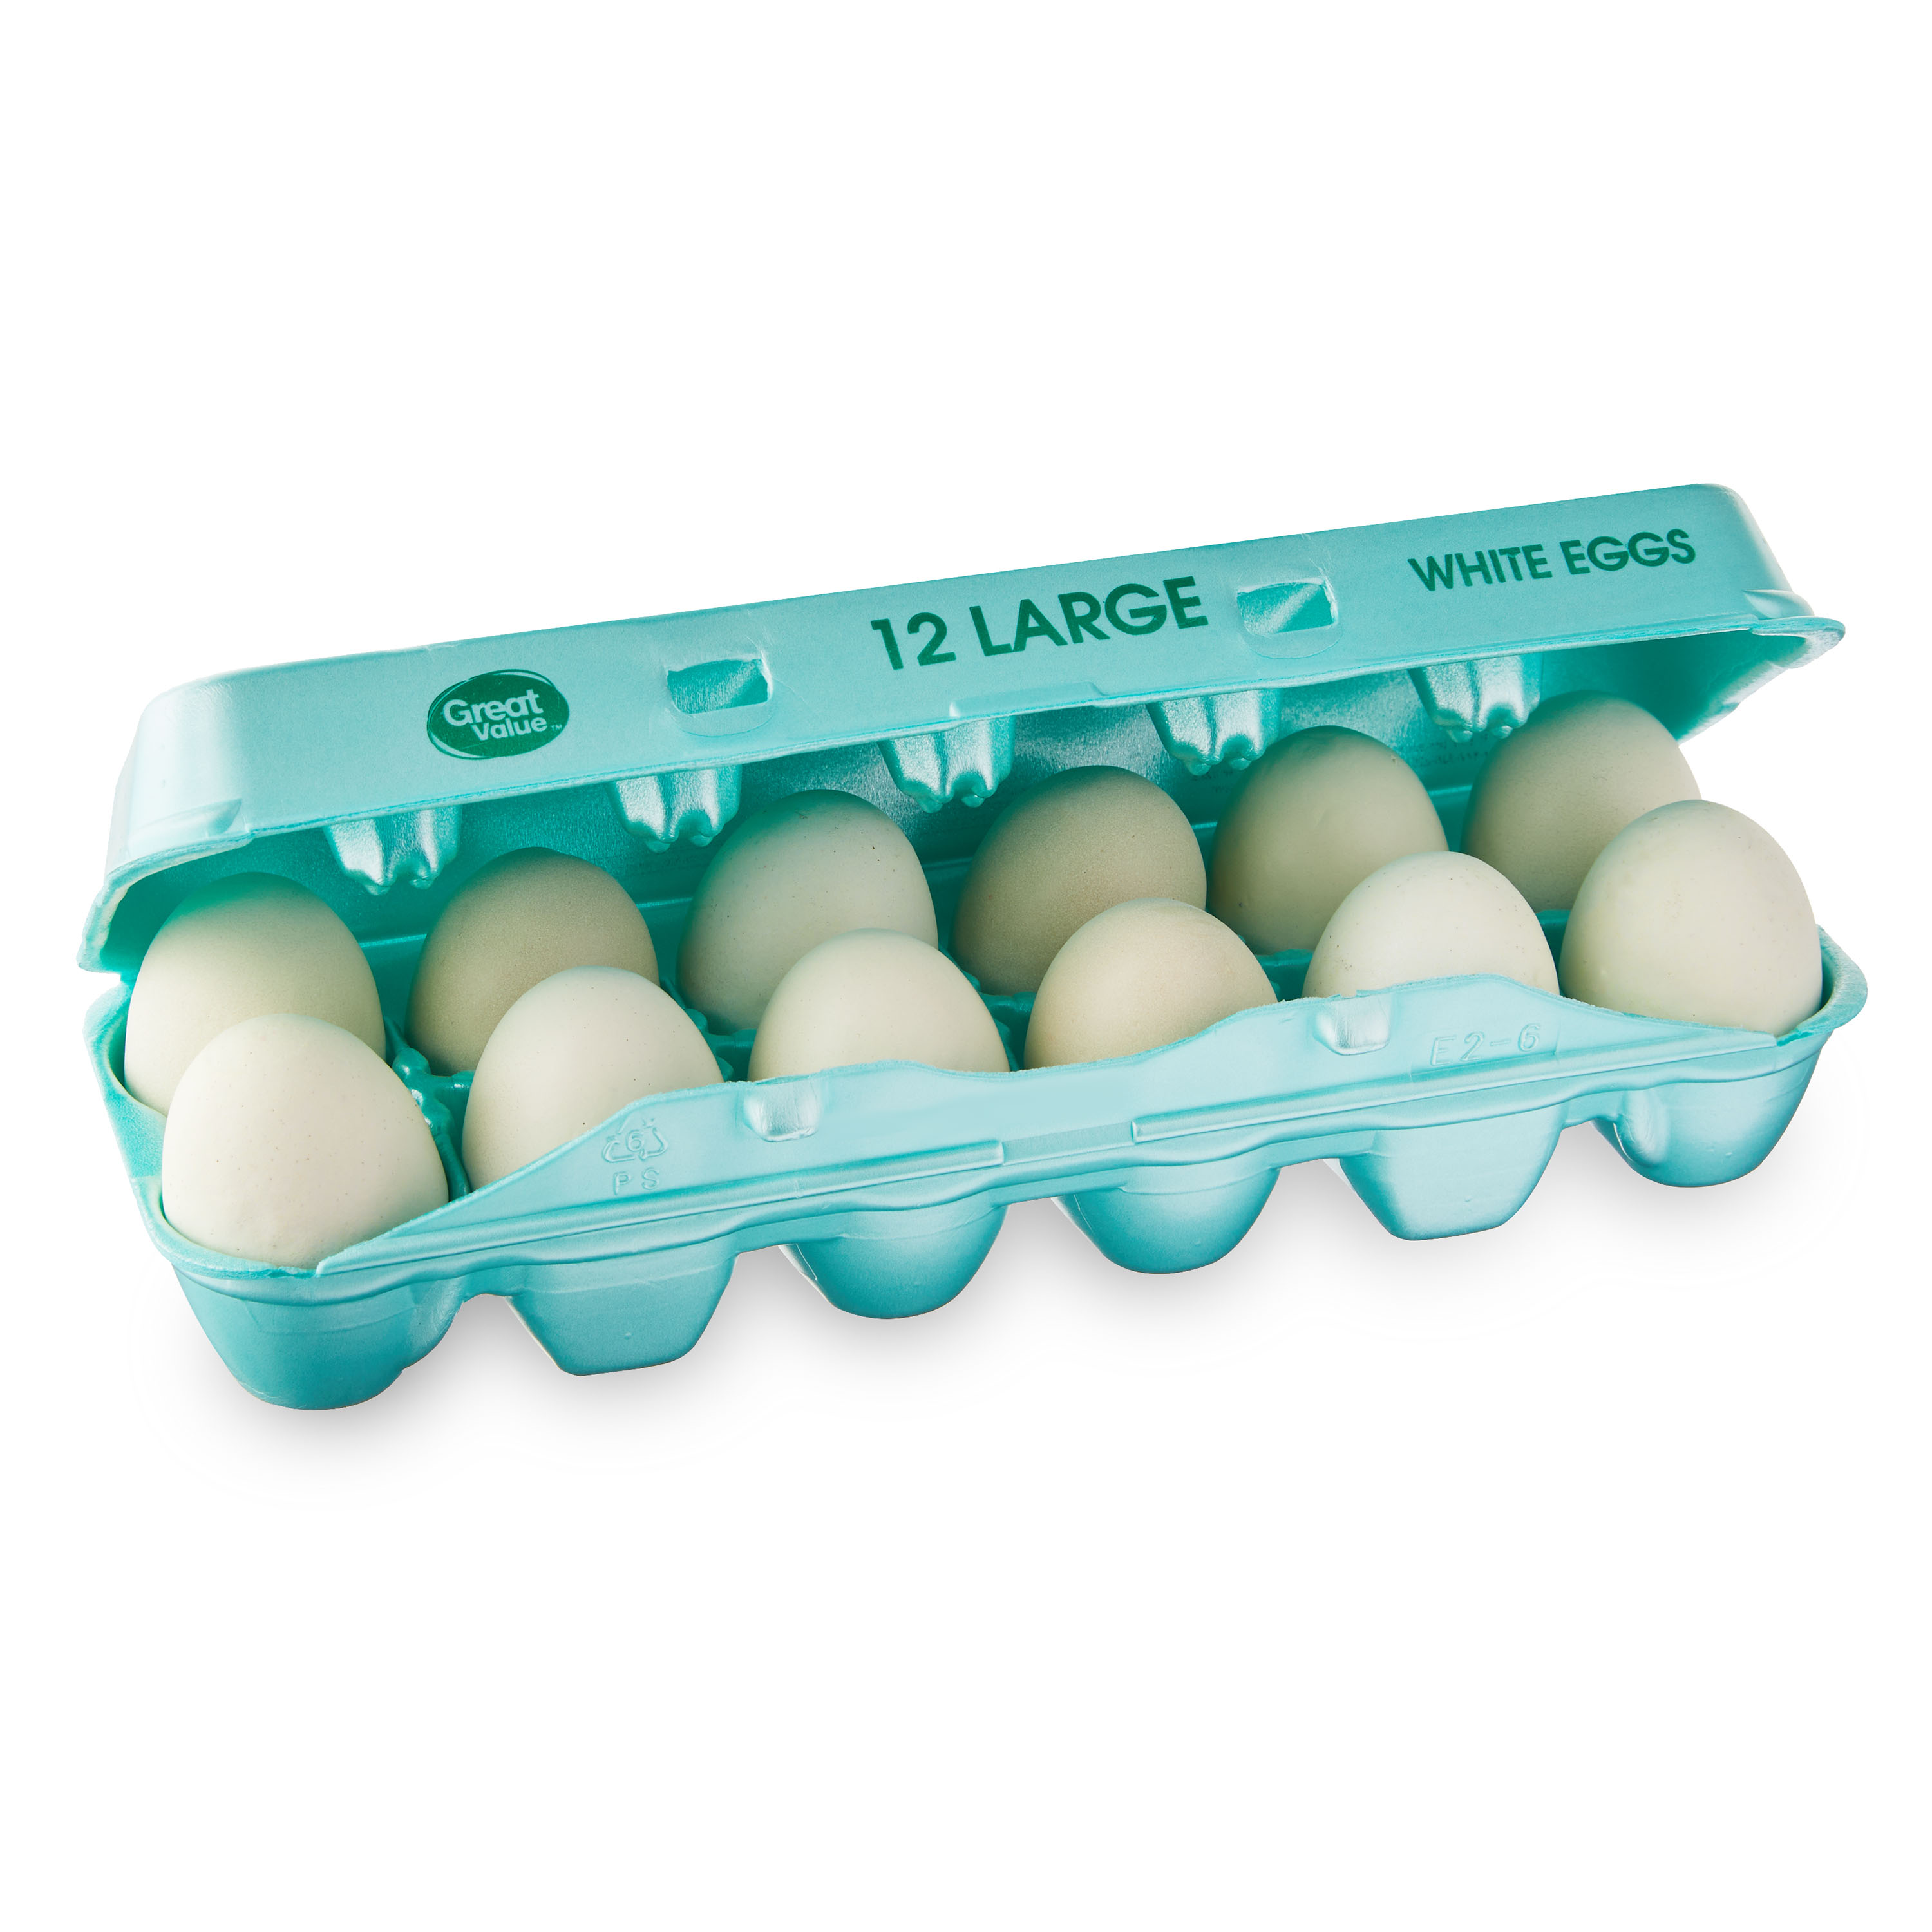 Great Value Large White Eggs, 12 Count - image 4 of 6